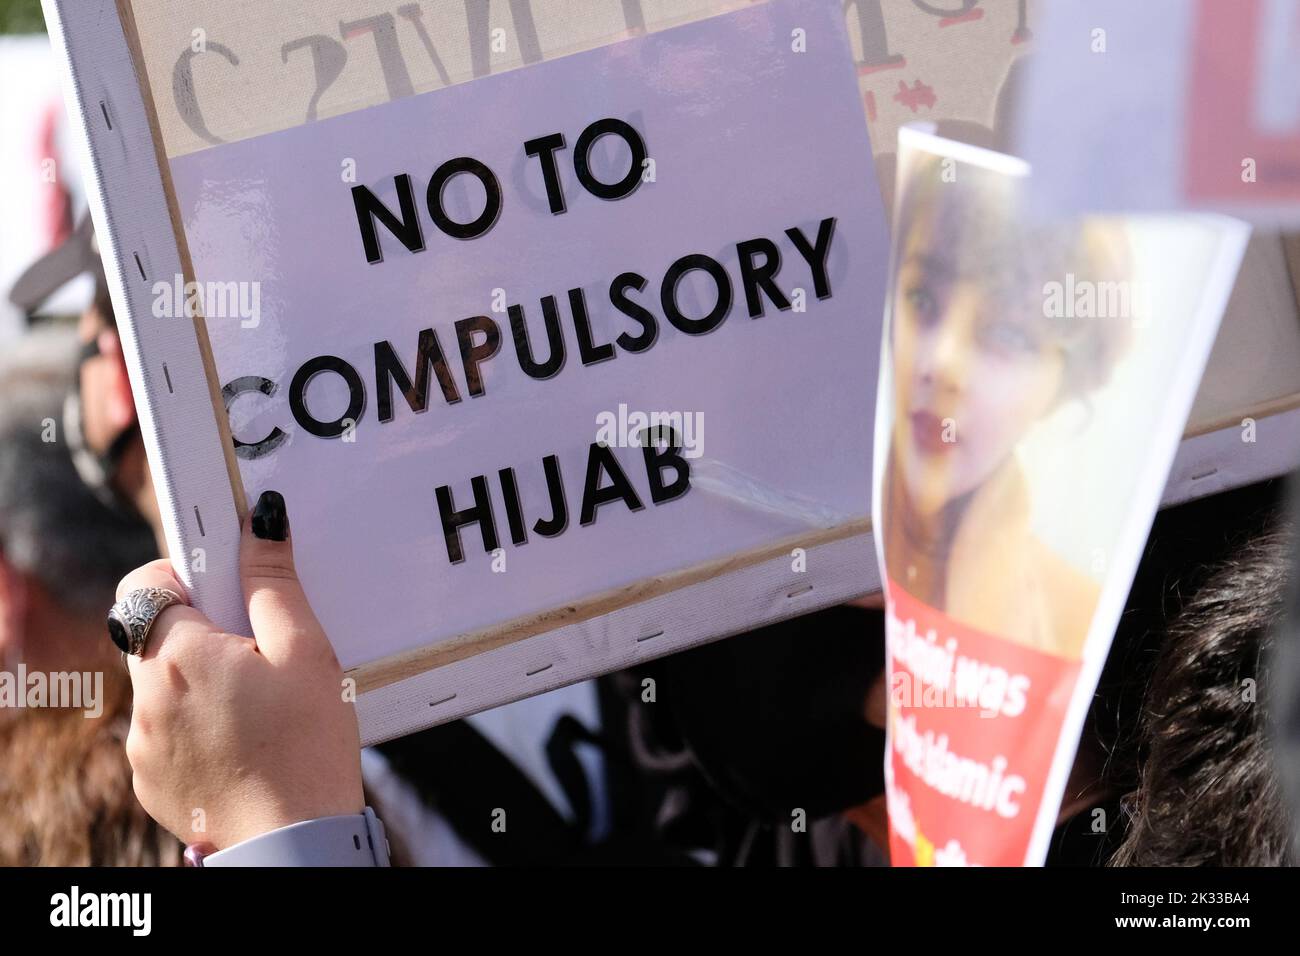 Iranian Embassy, London, UK. 24th Sept 2022. Protesters opposite the Iranian embassy against the death of Mahsa Amini in police custody in Iran.Credit: Matthew Chattle/Alamy Live News Stock Photo